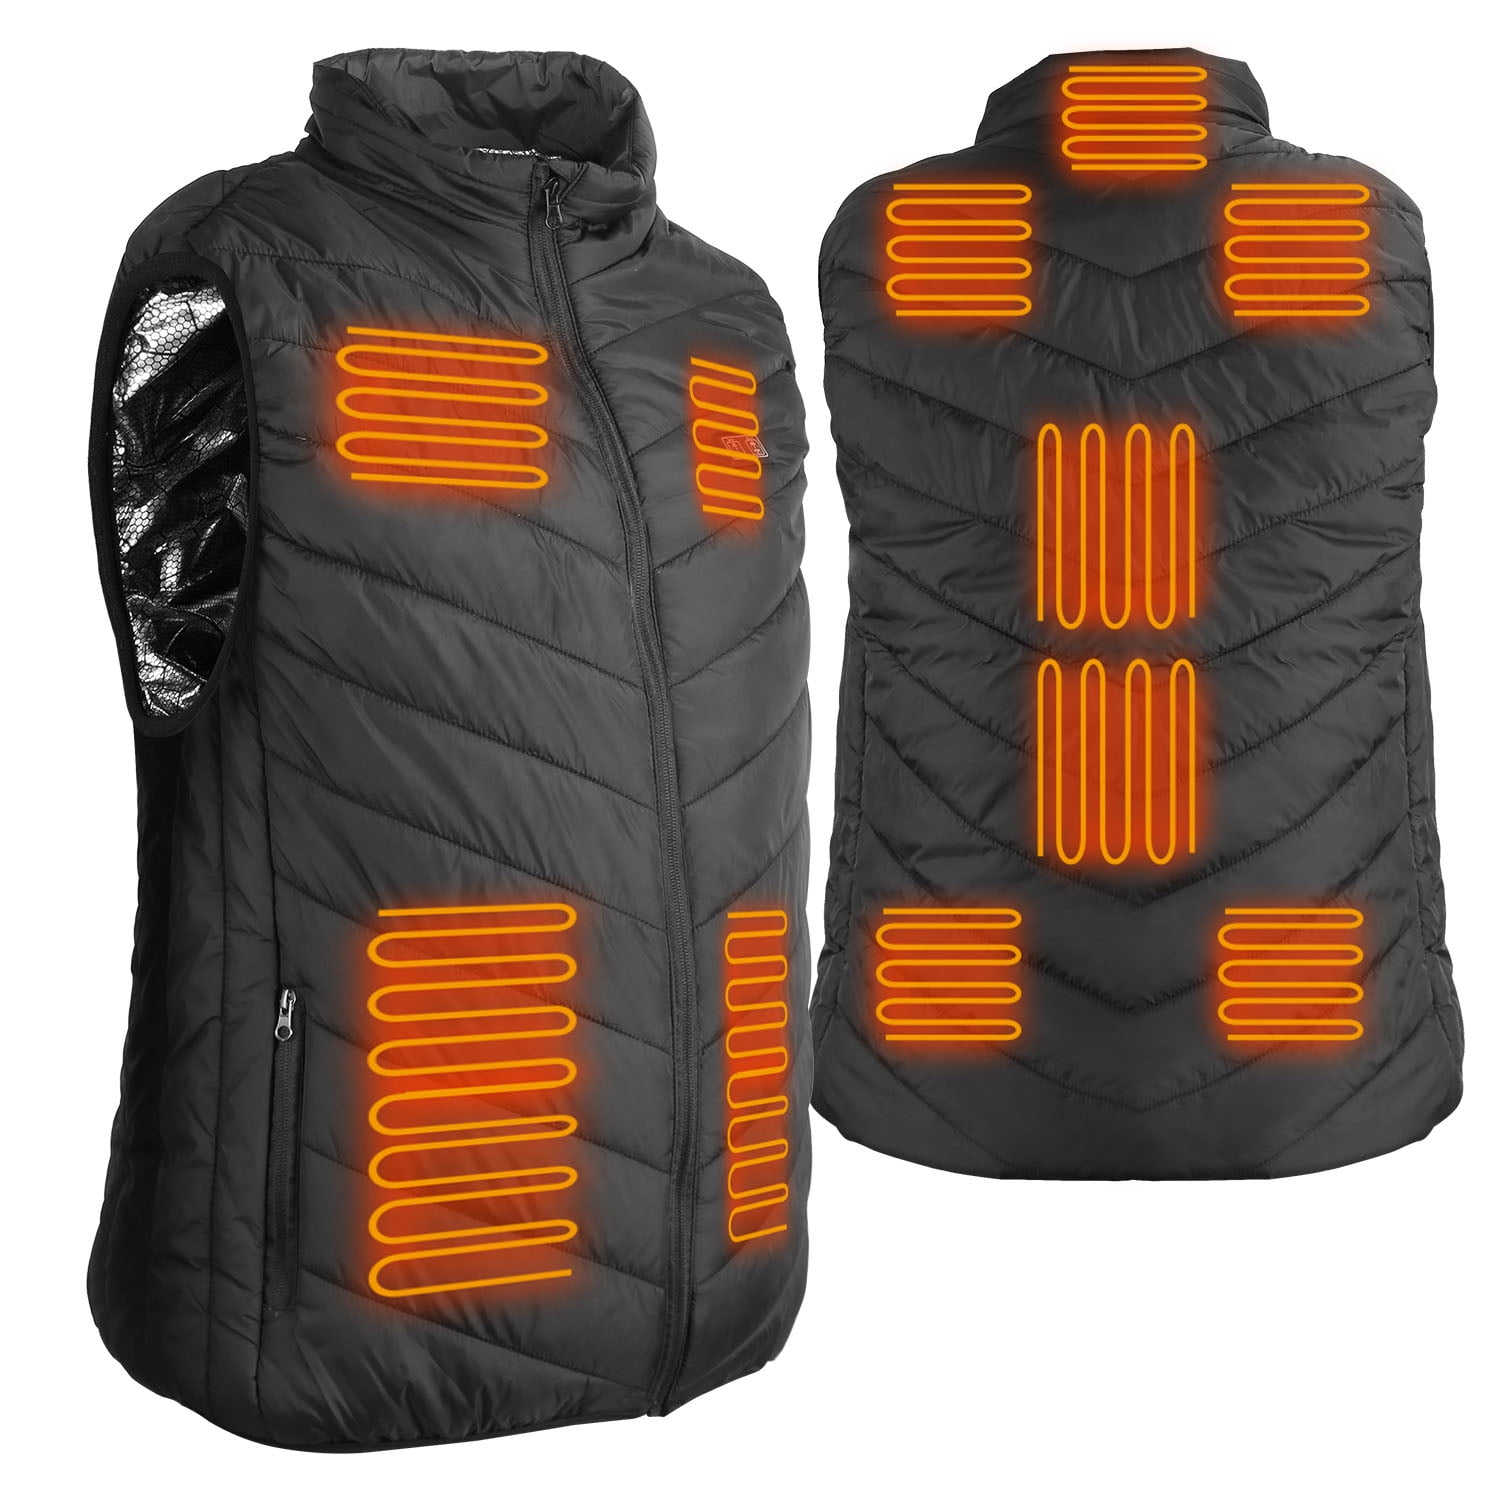 iMounTEK Heated Vest, Heated Clothing for Men Women, Lightweight USB Electric Heated Jacket with 3 Heating Levels, 11 Heating Zones, Outdoor Fishing